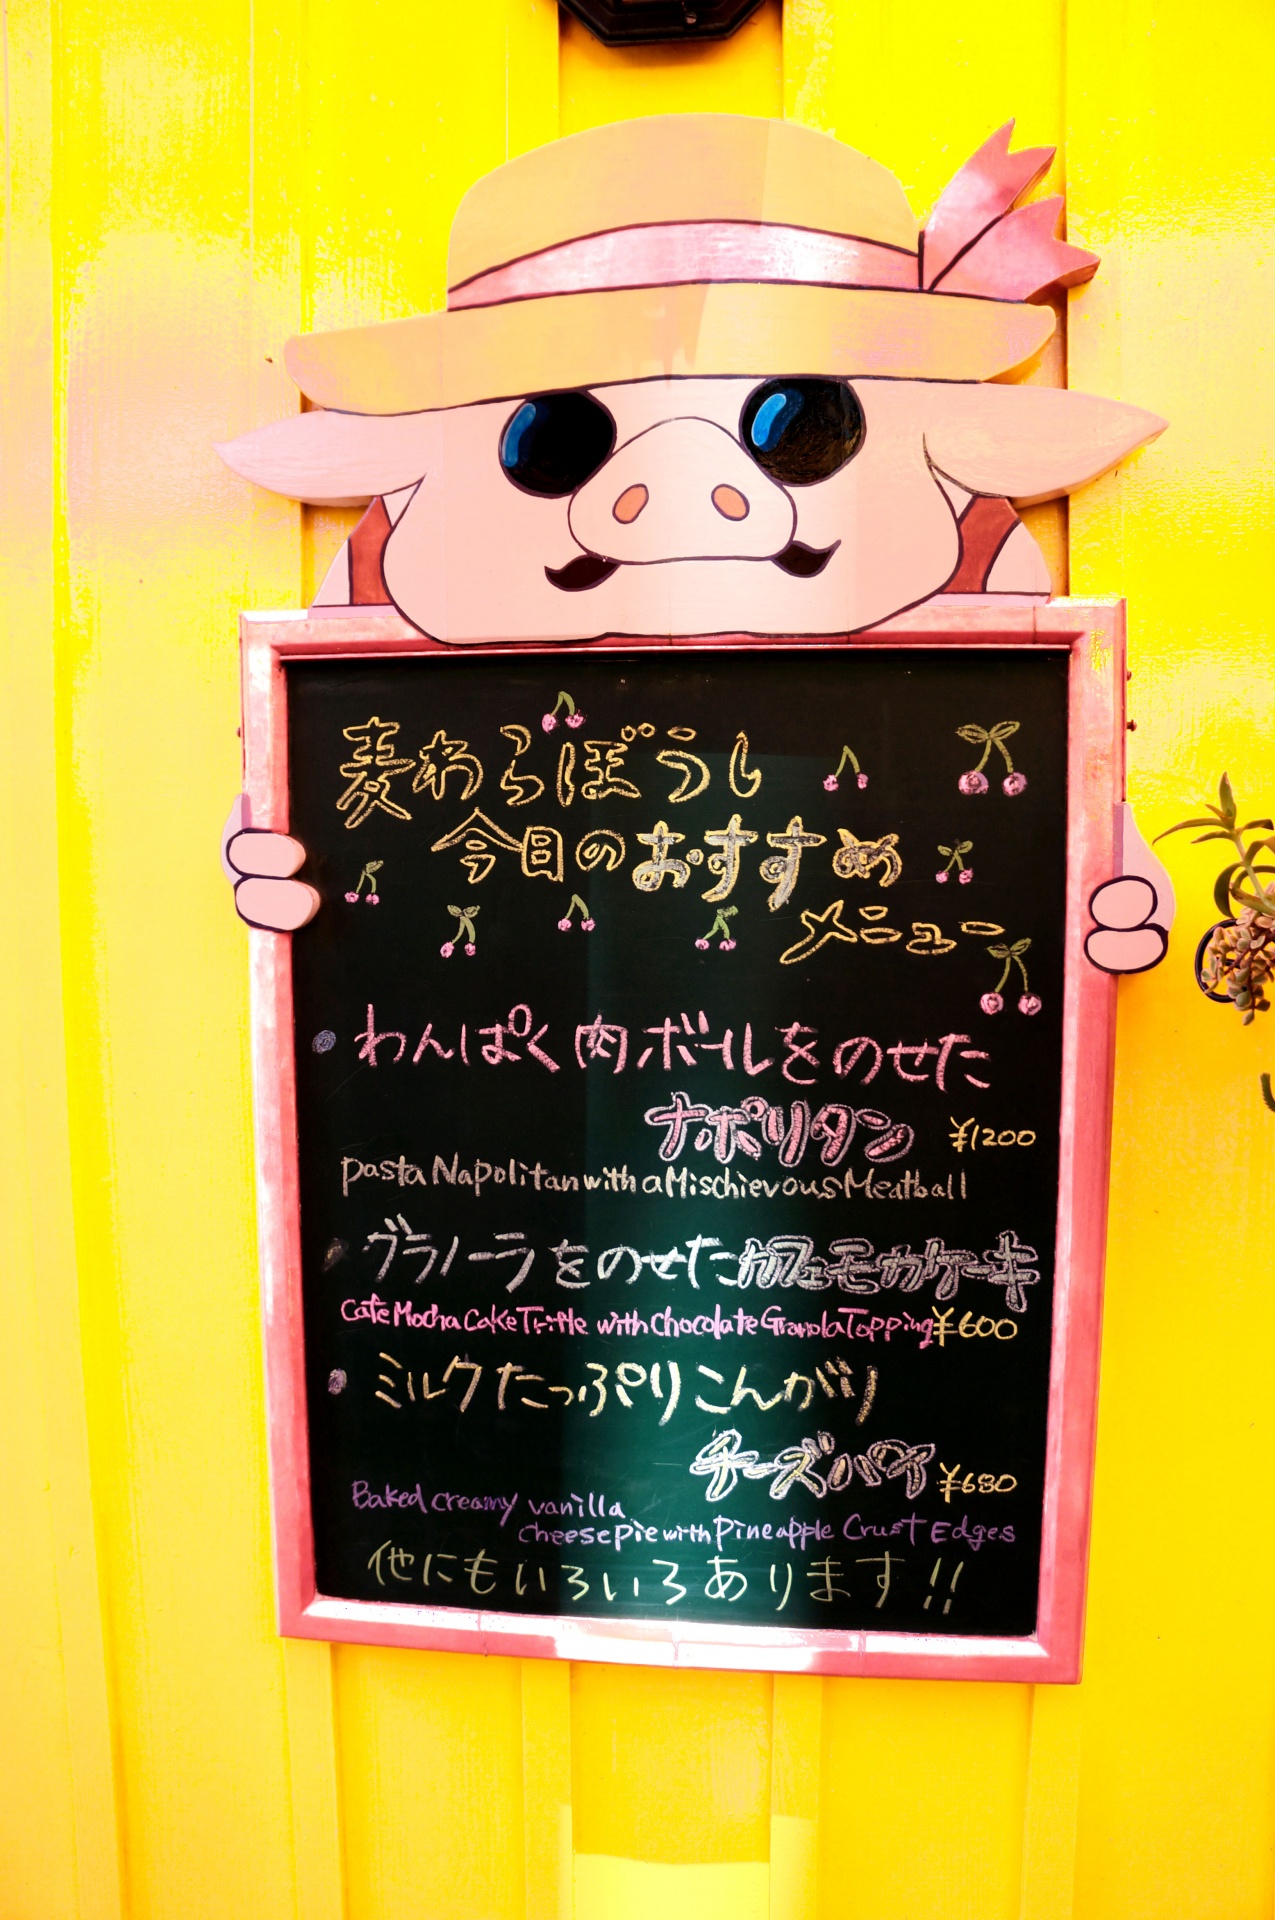 Japanese menu with a Porco Rosso pig from the restaurant at the Ghibli Museum in Tokyo, Japan.